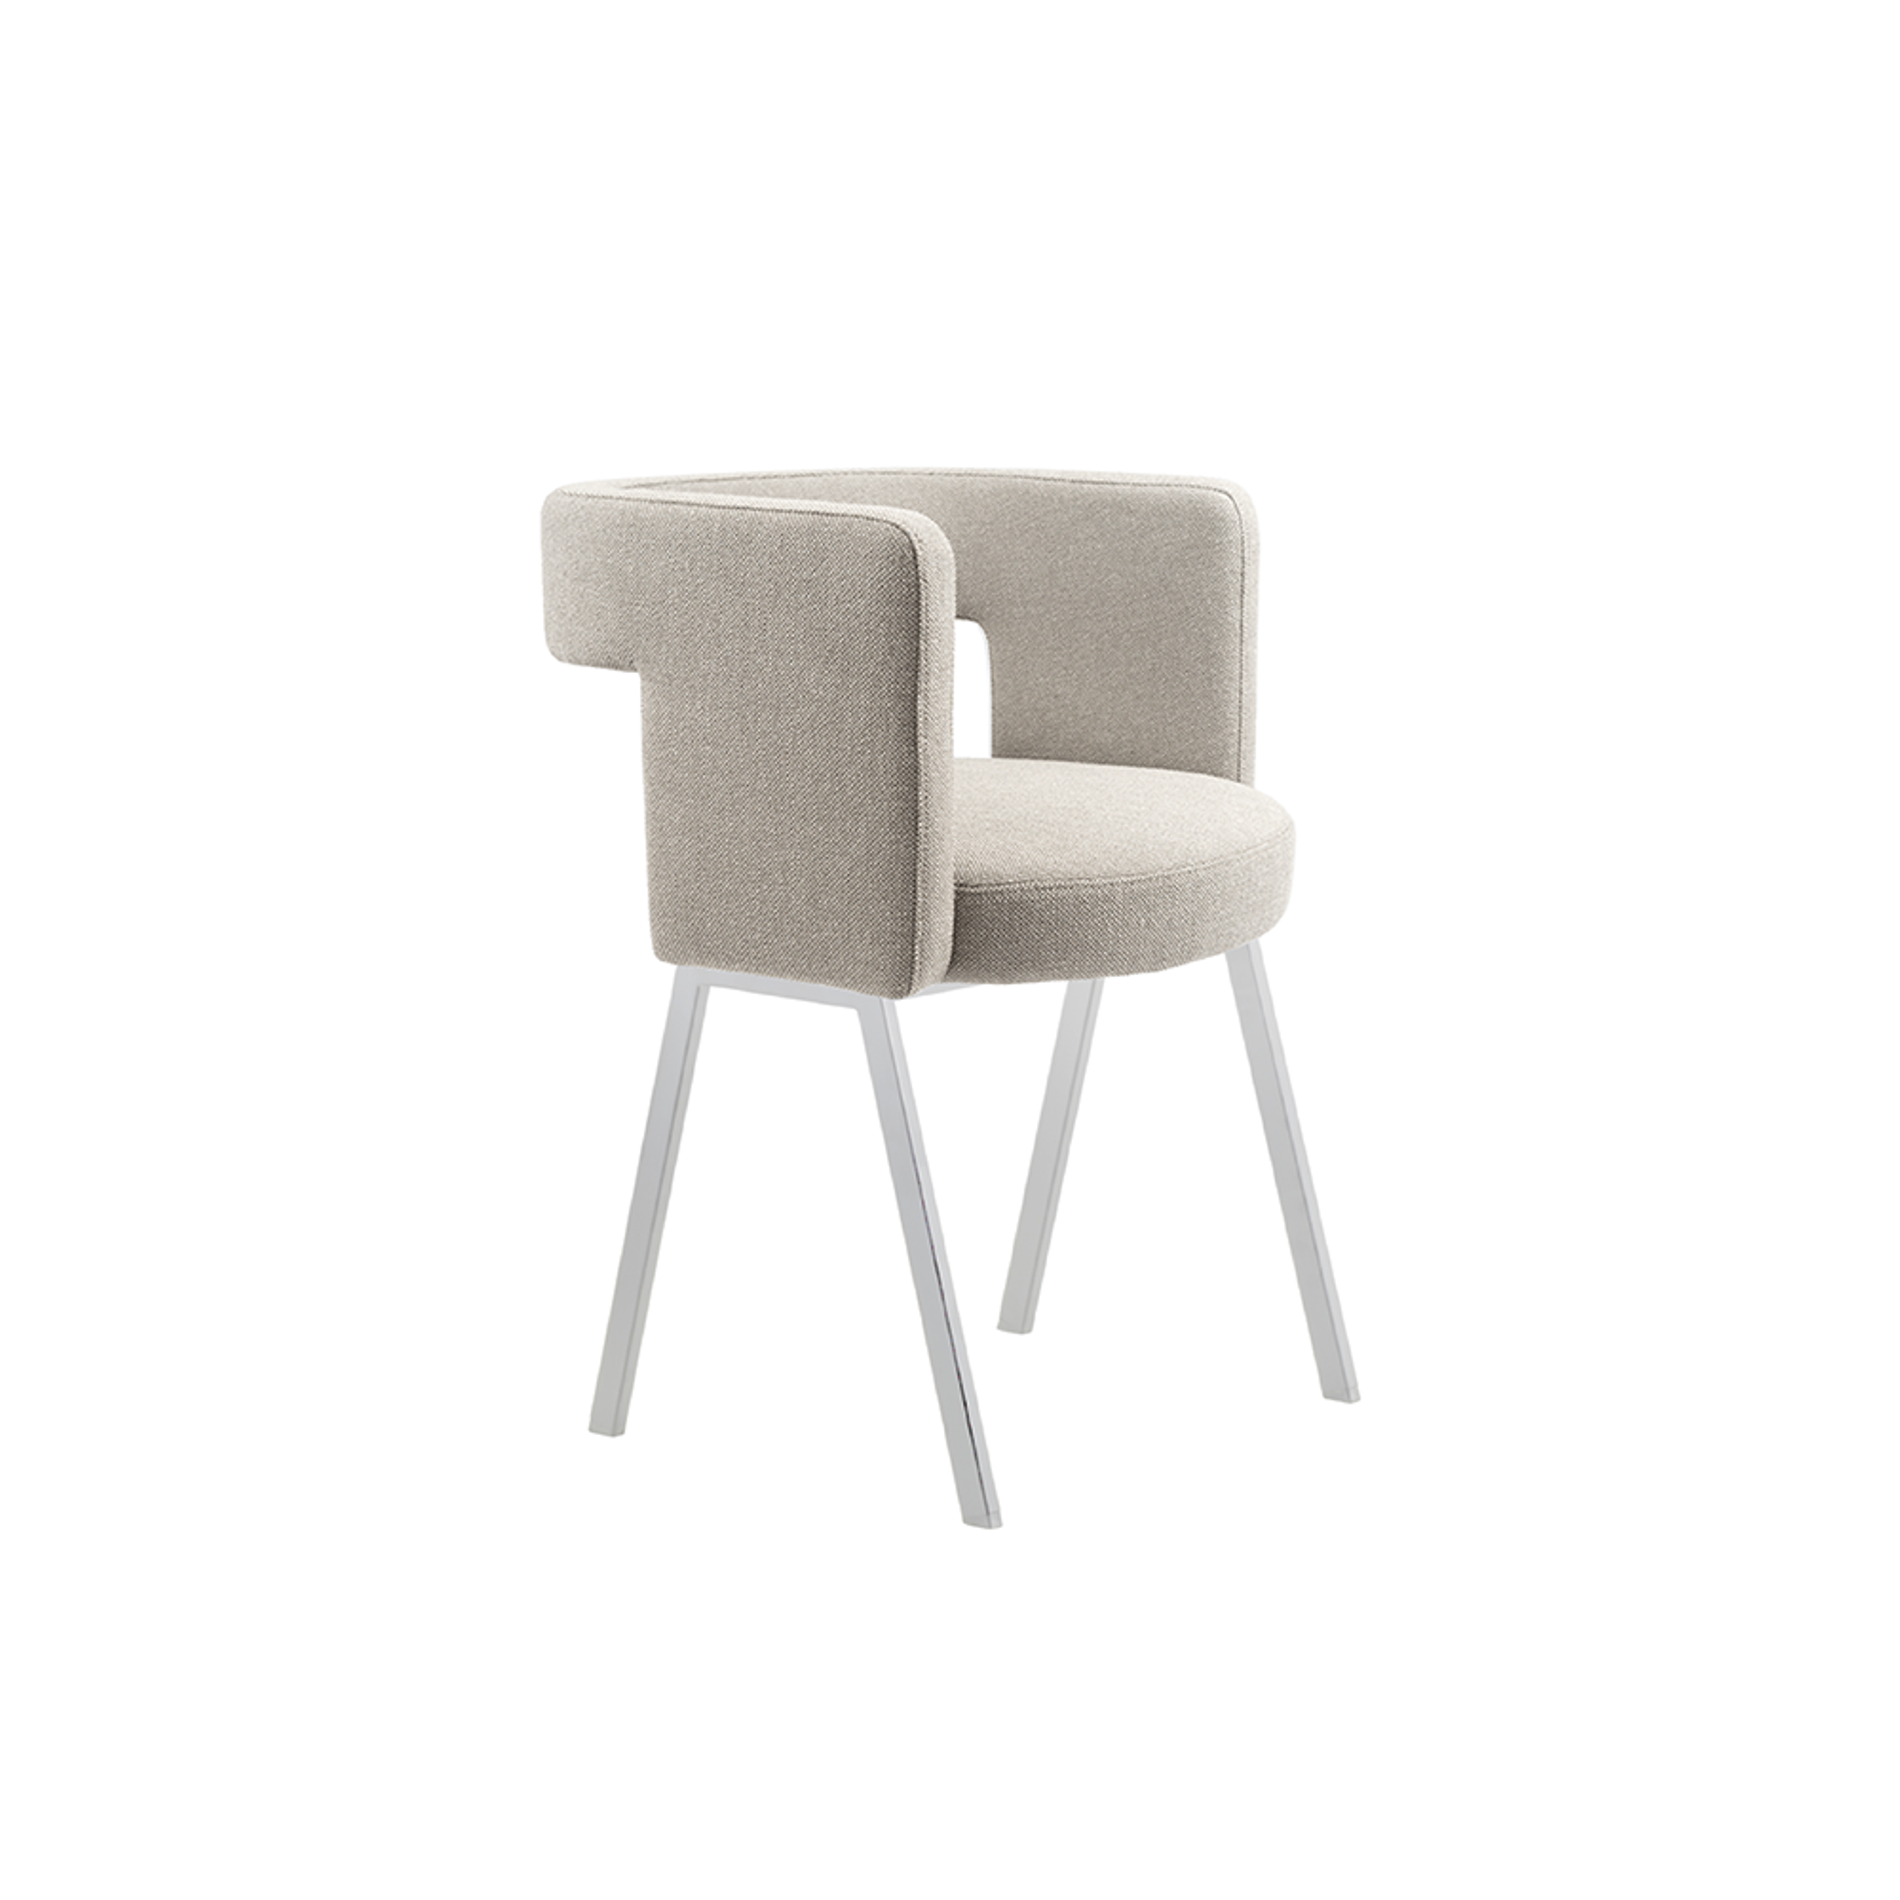 TECTA D8P Padded Armchair - Special Color Frame Ral 7038 / Hallingdal 0103